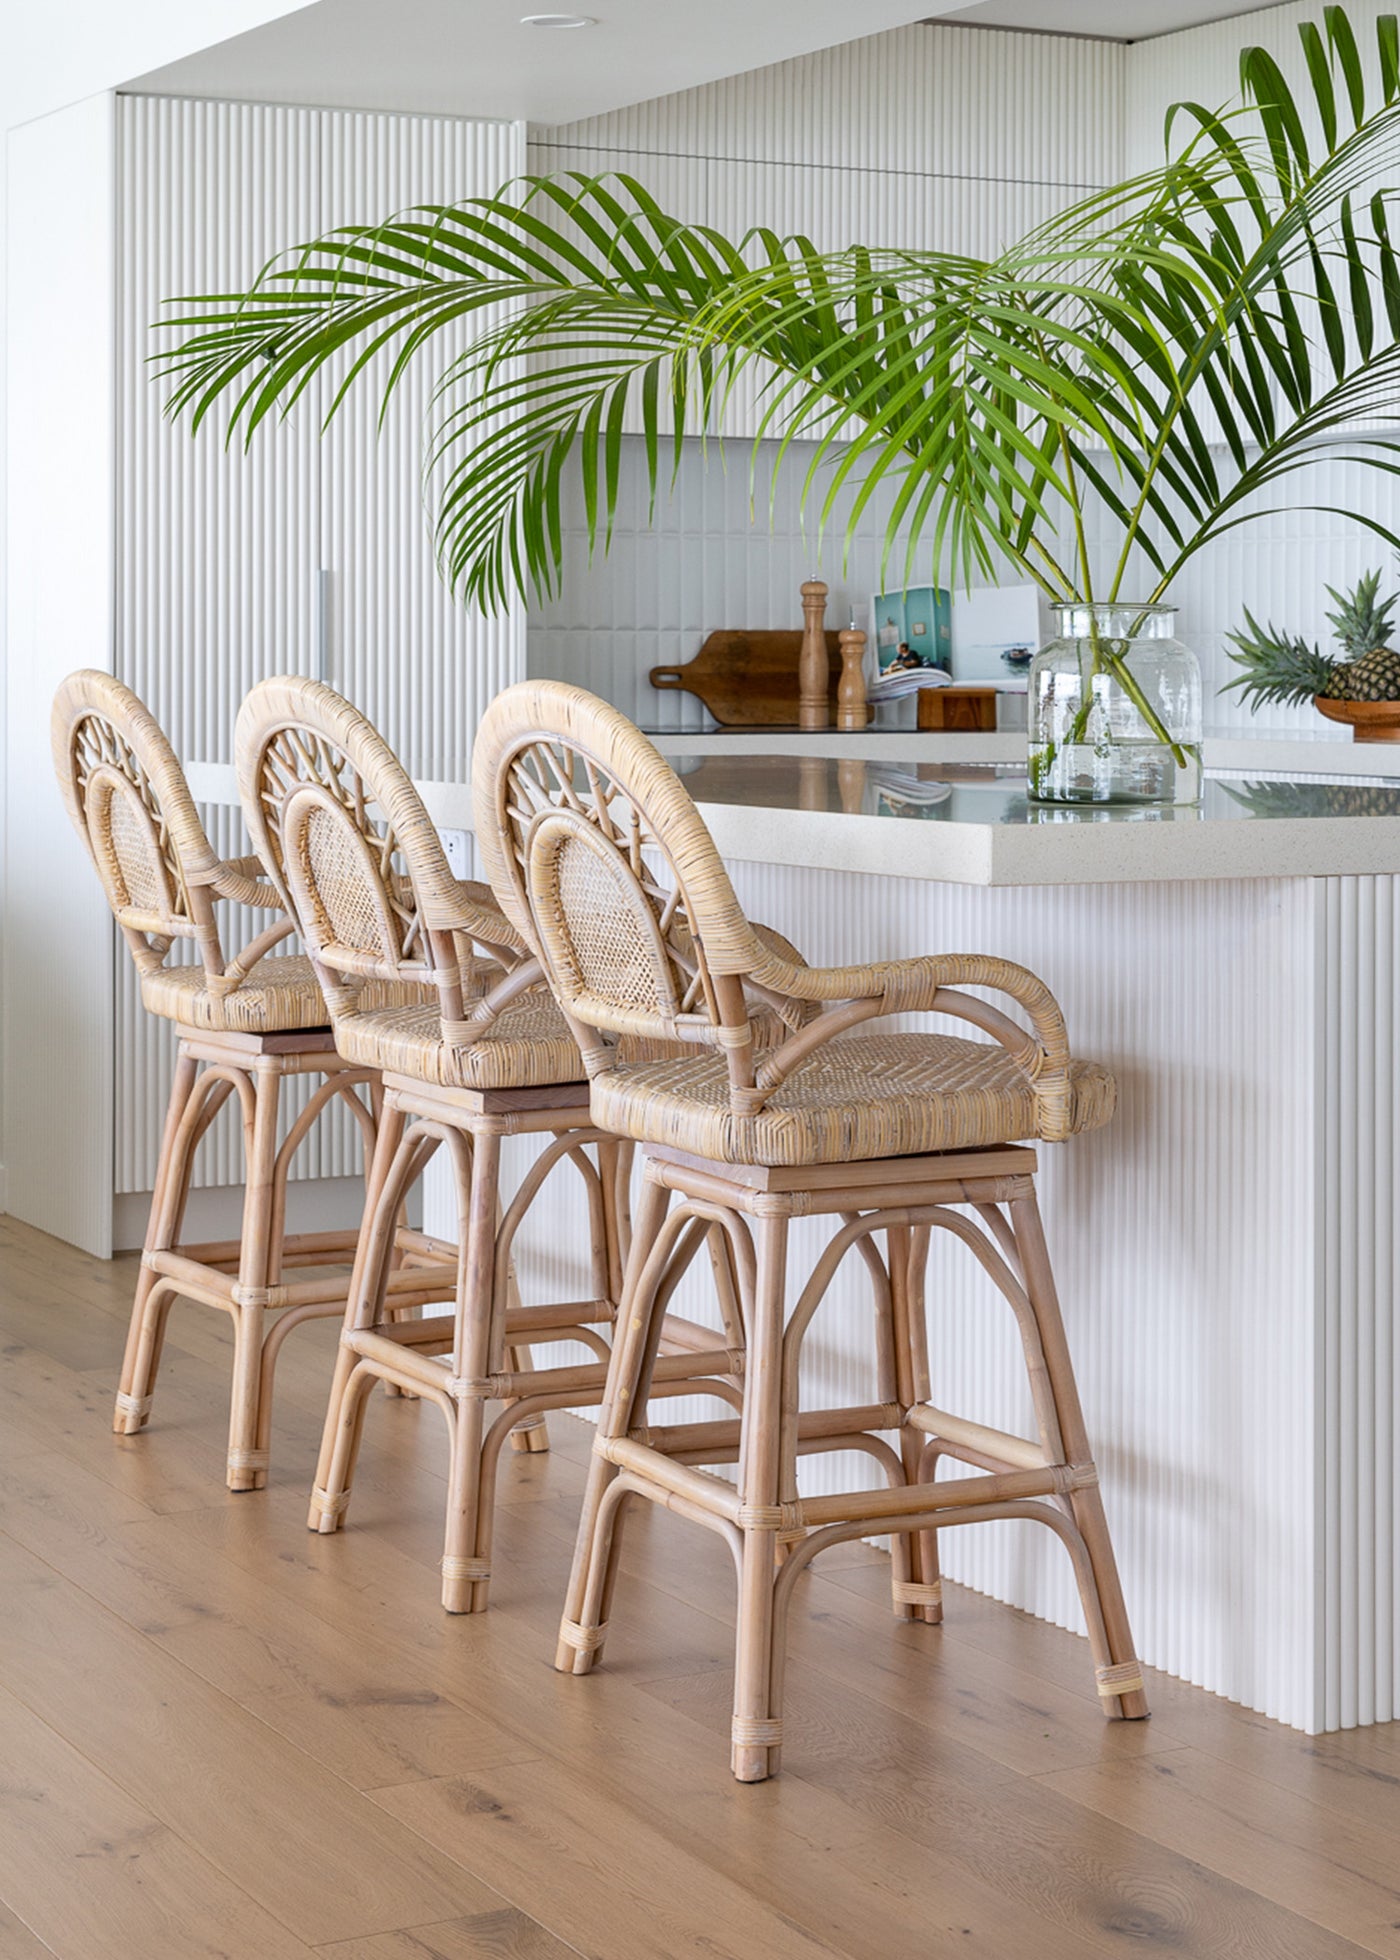 Styled image of 3 light lola bar stools at a kitchen counter, the kitchen is all white with a large clear vase of palm leaves